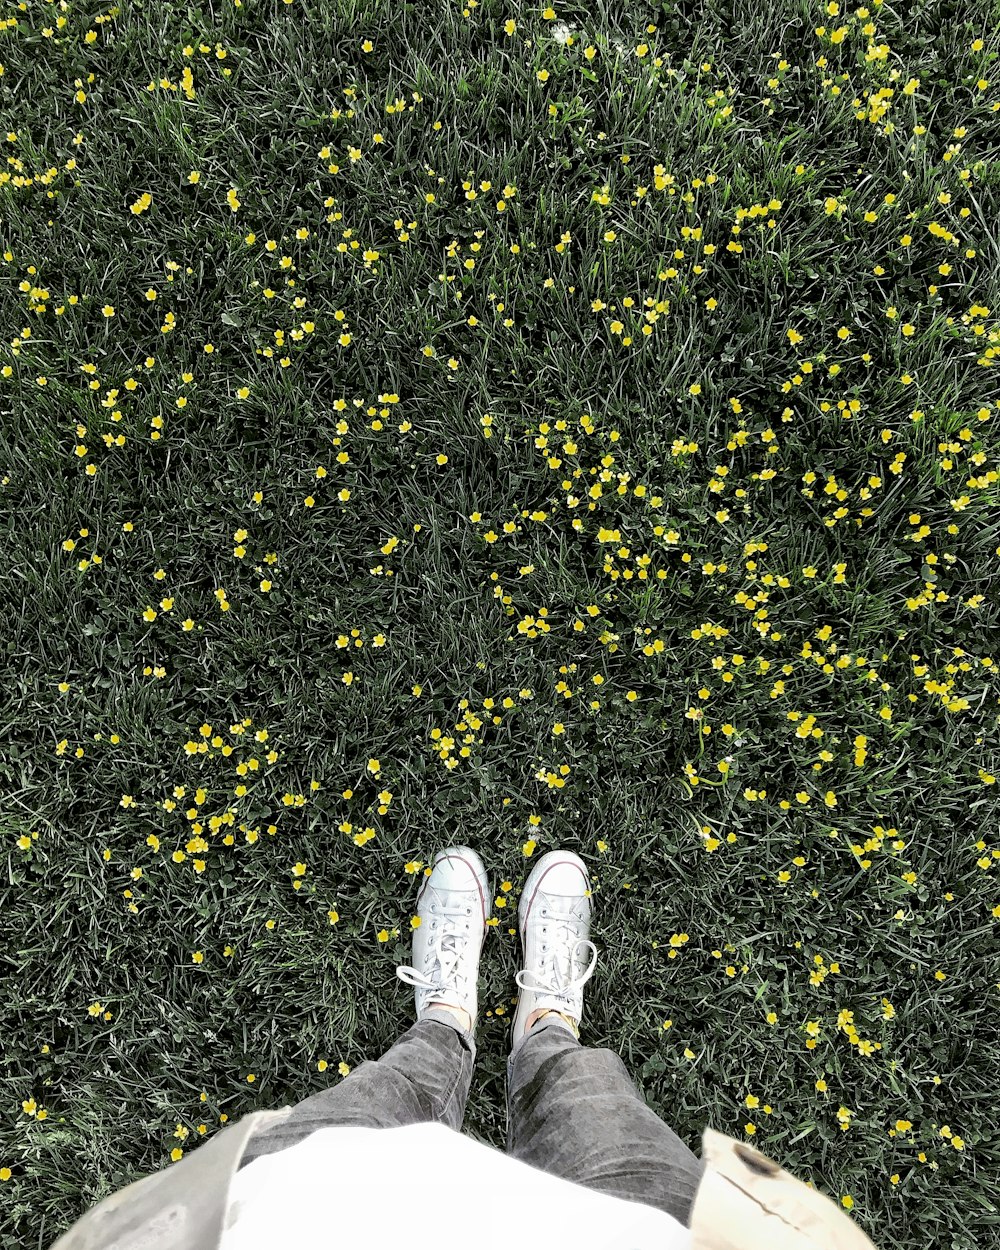 person in gray pants and white sneakers standing on yellow leaves